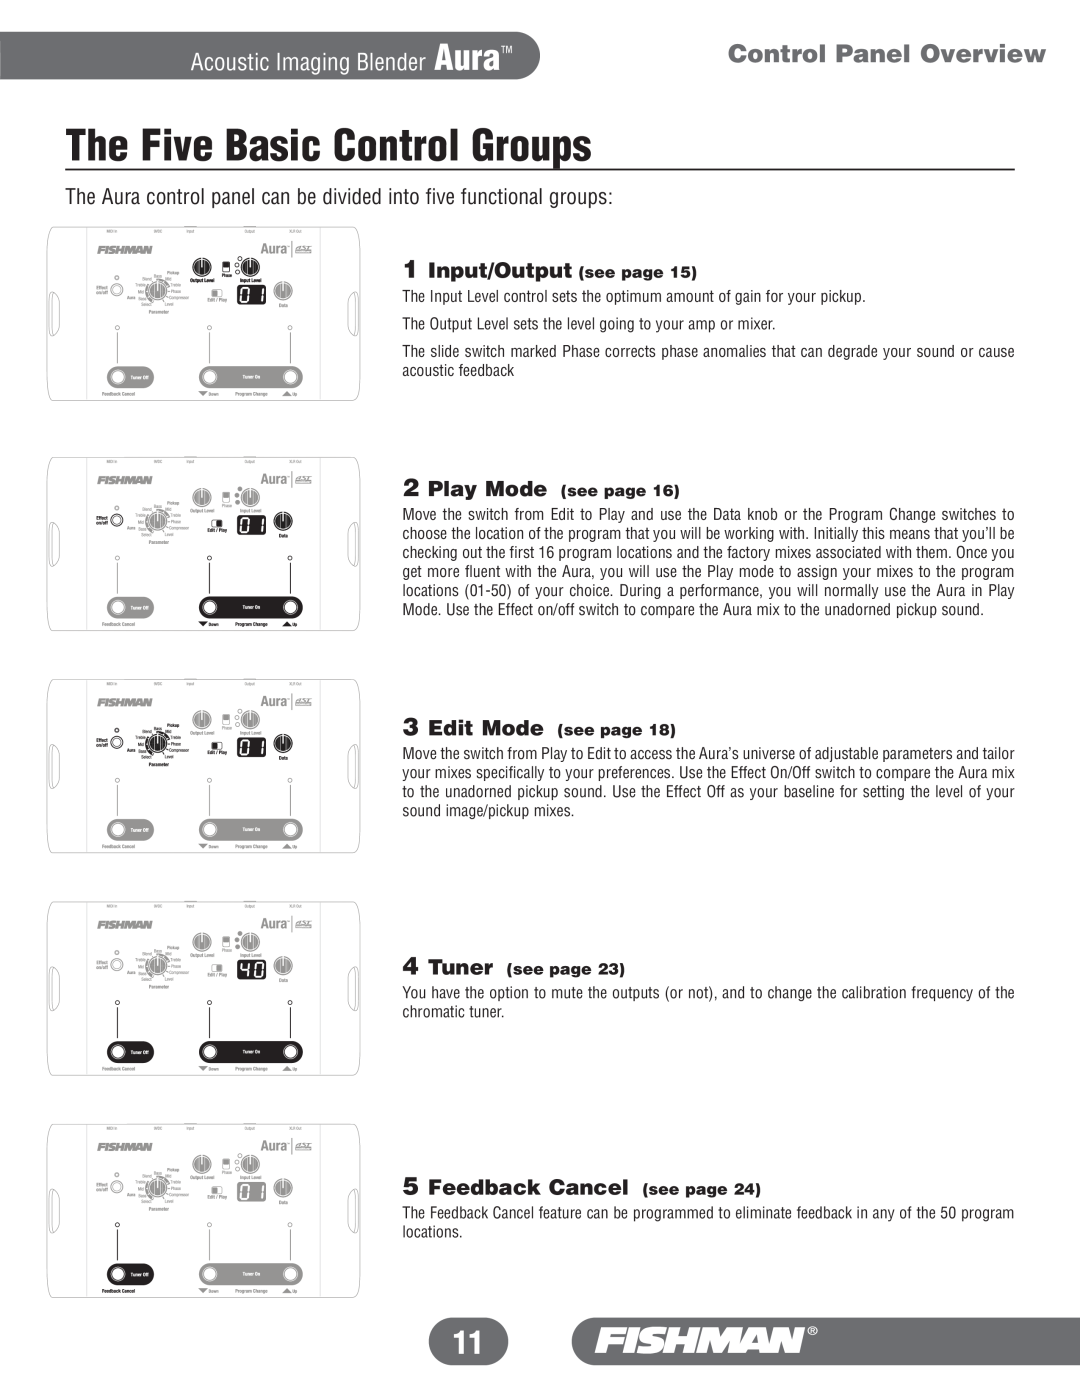 Fishman manual The Five Basic Control Groups, Control Panel Overview, Acoustic Imaging Blender Aura 